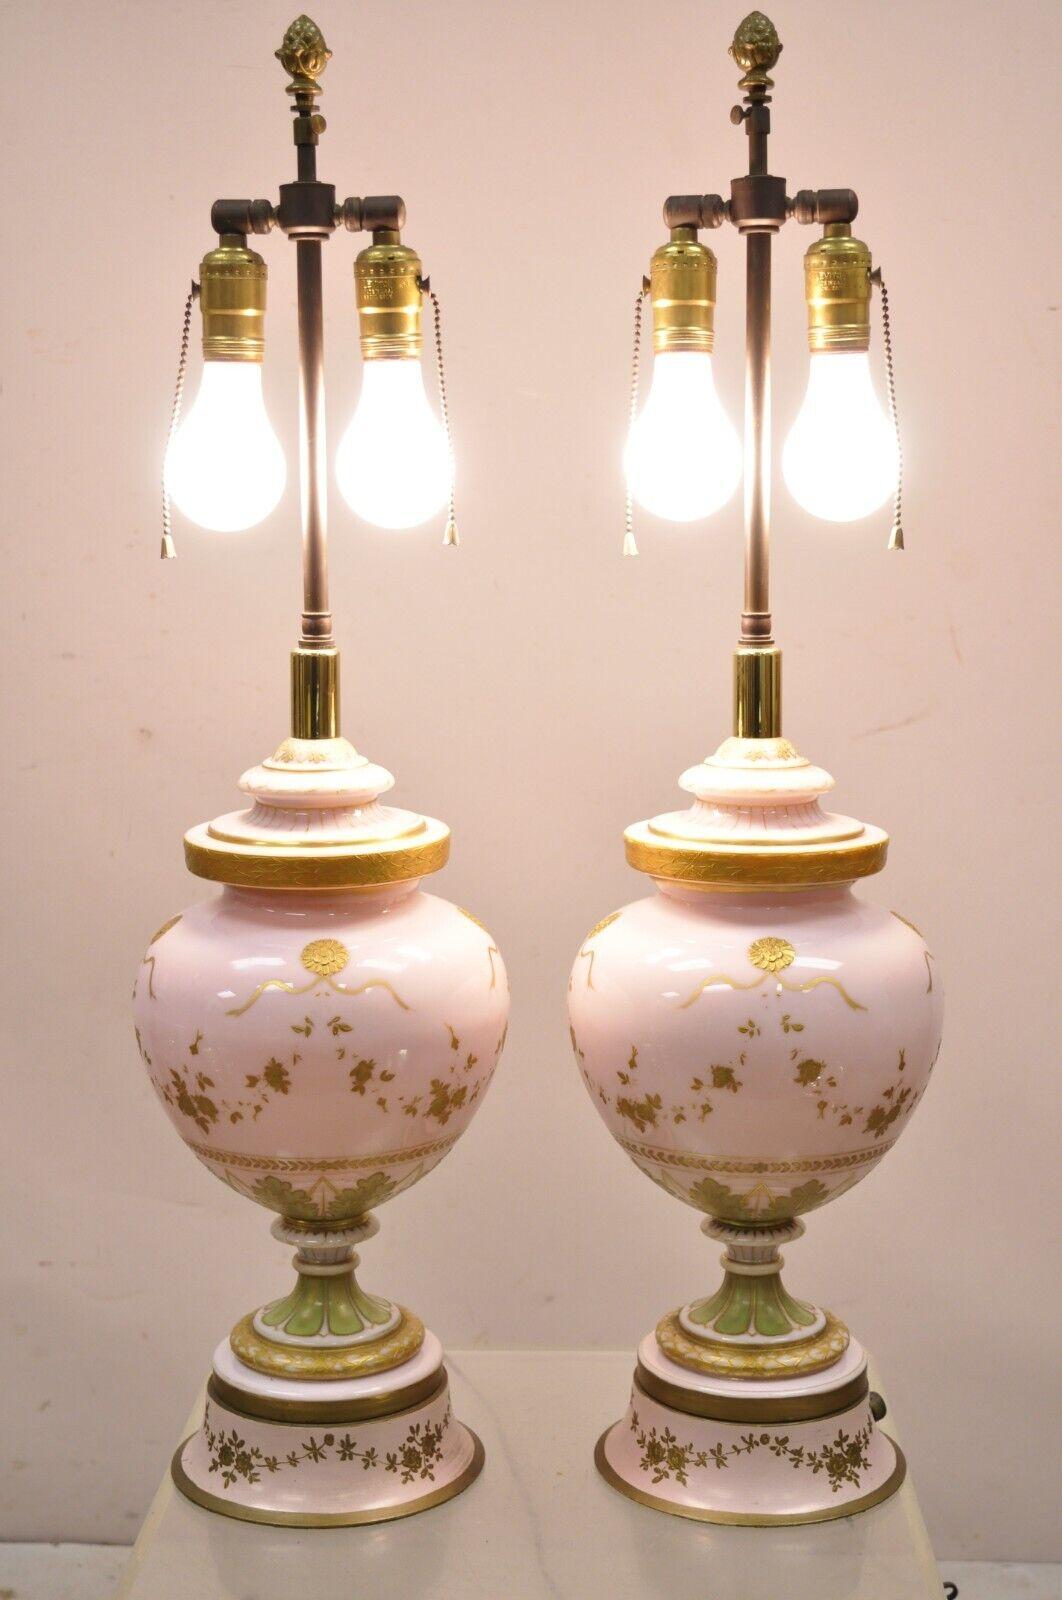 Antique French Pink Porcelain Hand Painted Bulbous Table Lamps - a Pair. Item features french pink porcelain bulbous forms, gold gilt painted details, hand painted wooden base, twin brass sockets, very nice antique pair, quality craftsmanship. Circa